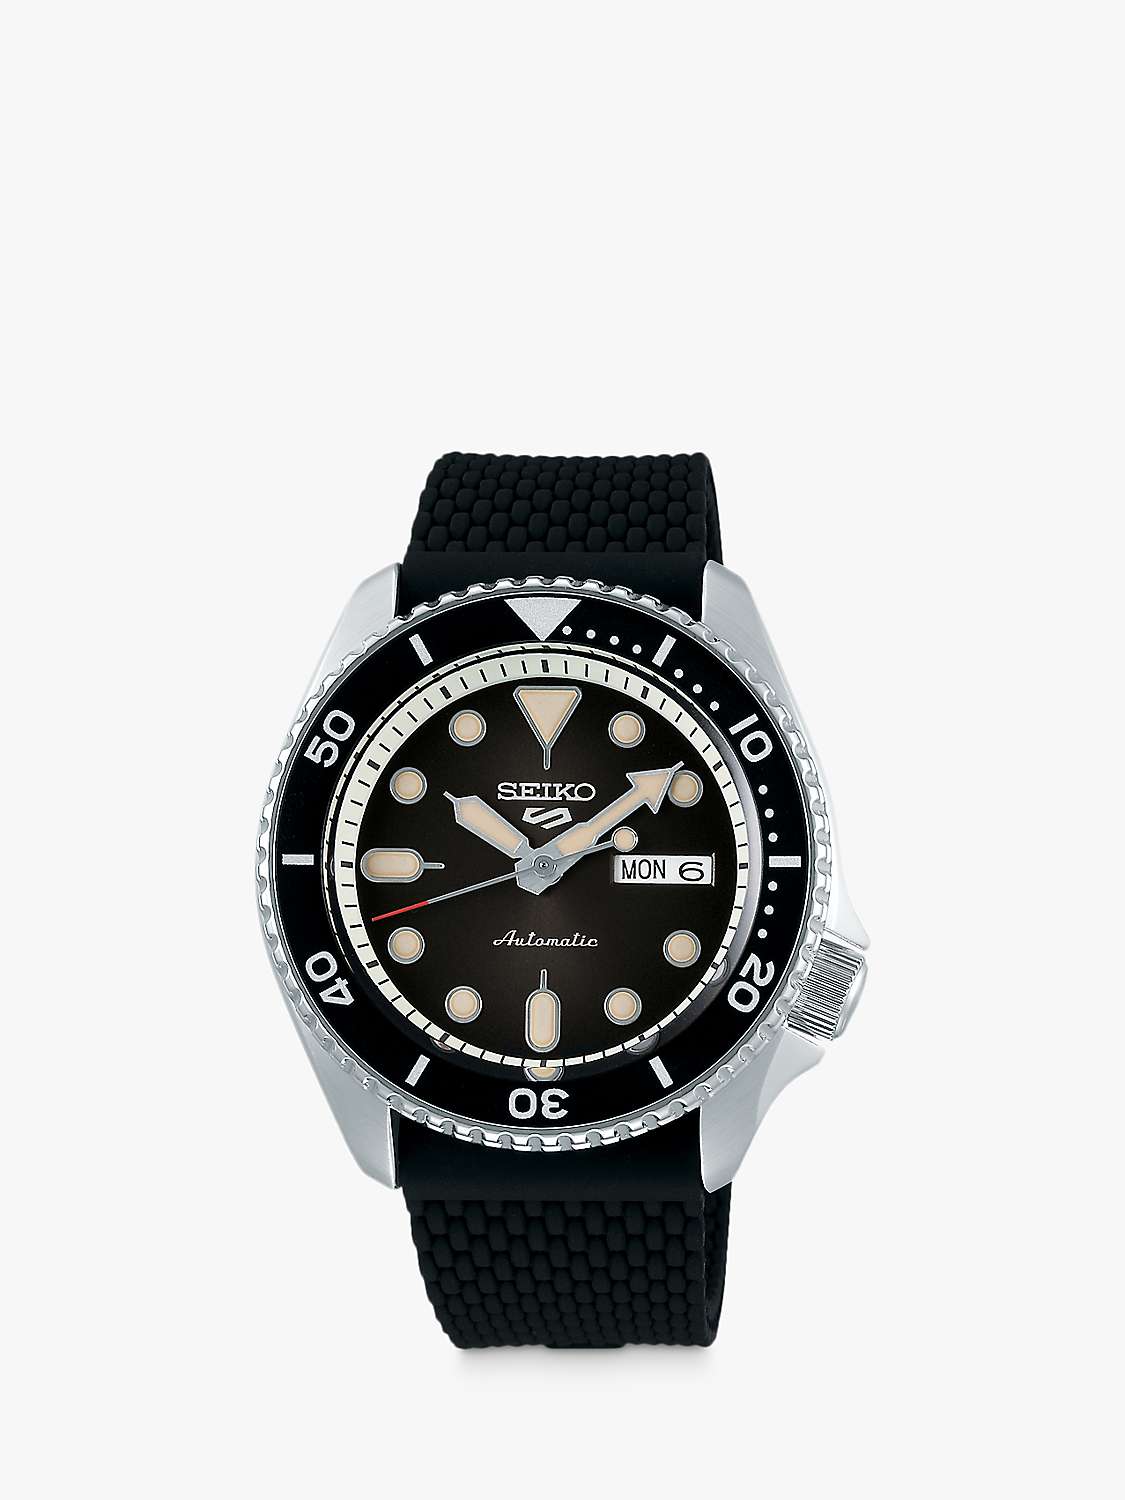 Buy Seiko SRPD73K2 Men's 5 Sports Automatic Day Date Rubber Strap Watch, Black Online at johnlewis.com